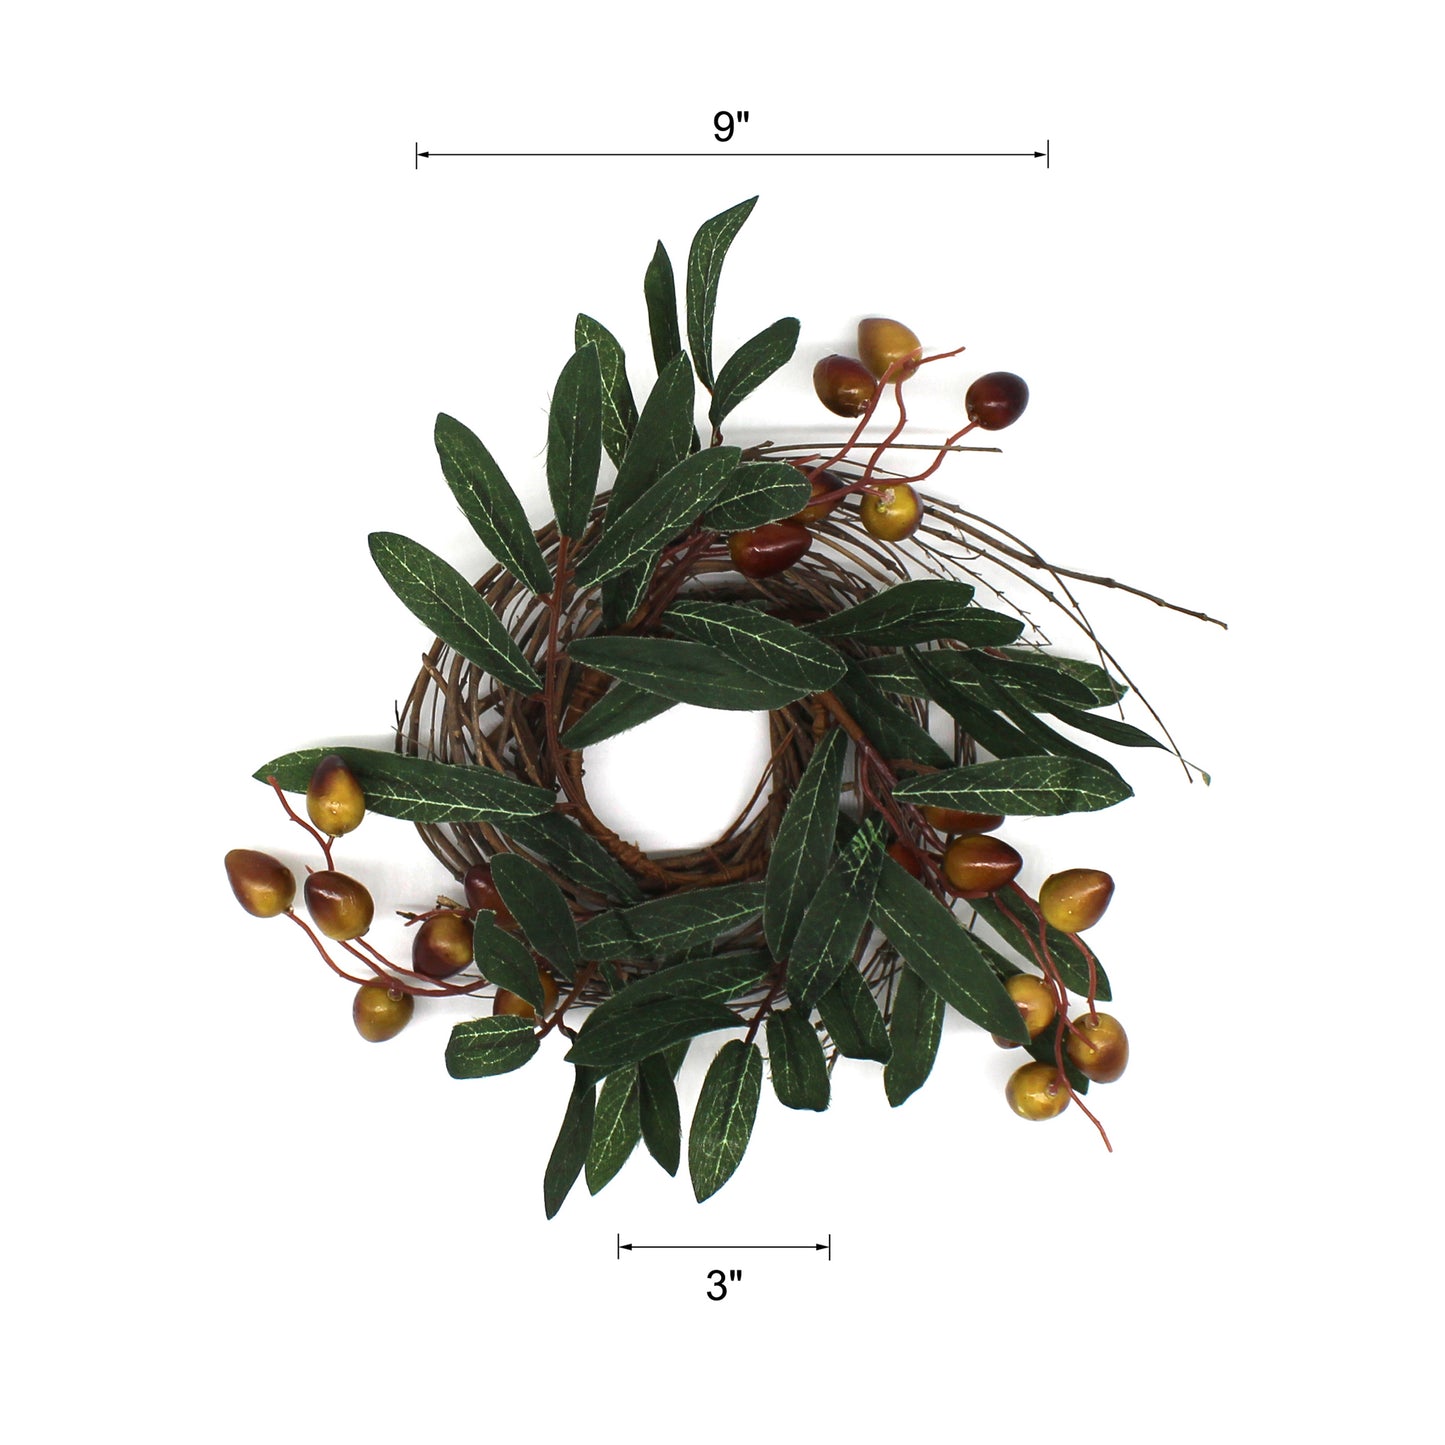 CVHOMEDECO. Rustic Country Artificial Olive branch and Twig Wreath, Year Round Full Green Wreath for Indoor or Outdoor Display, 9 Inch